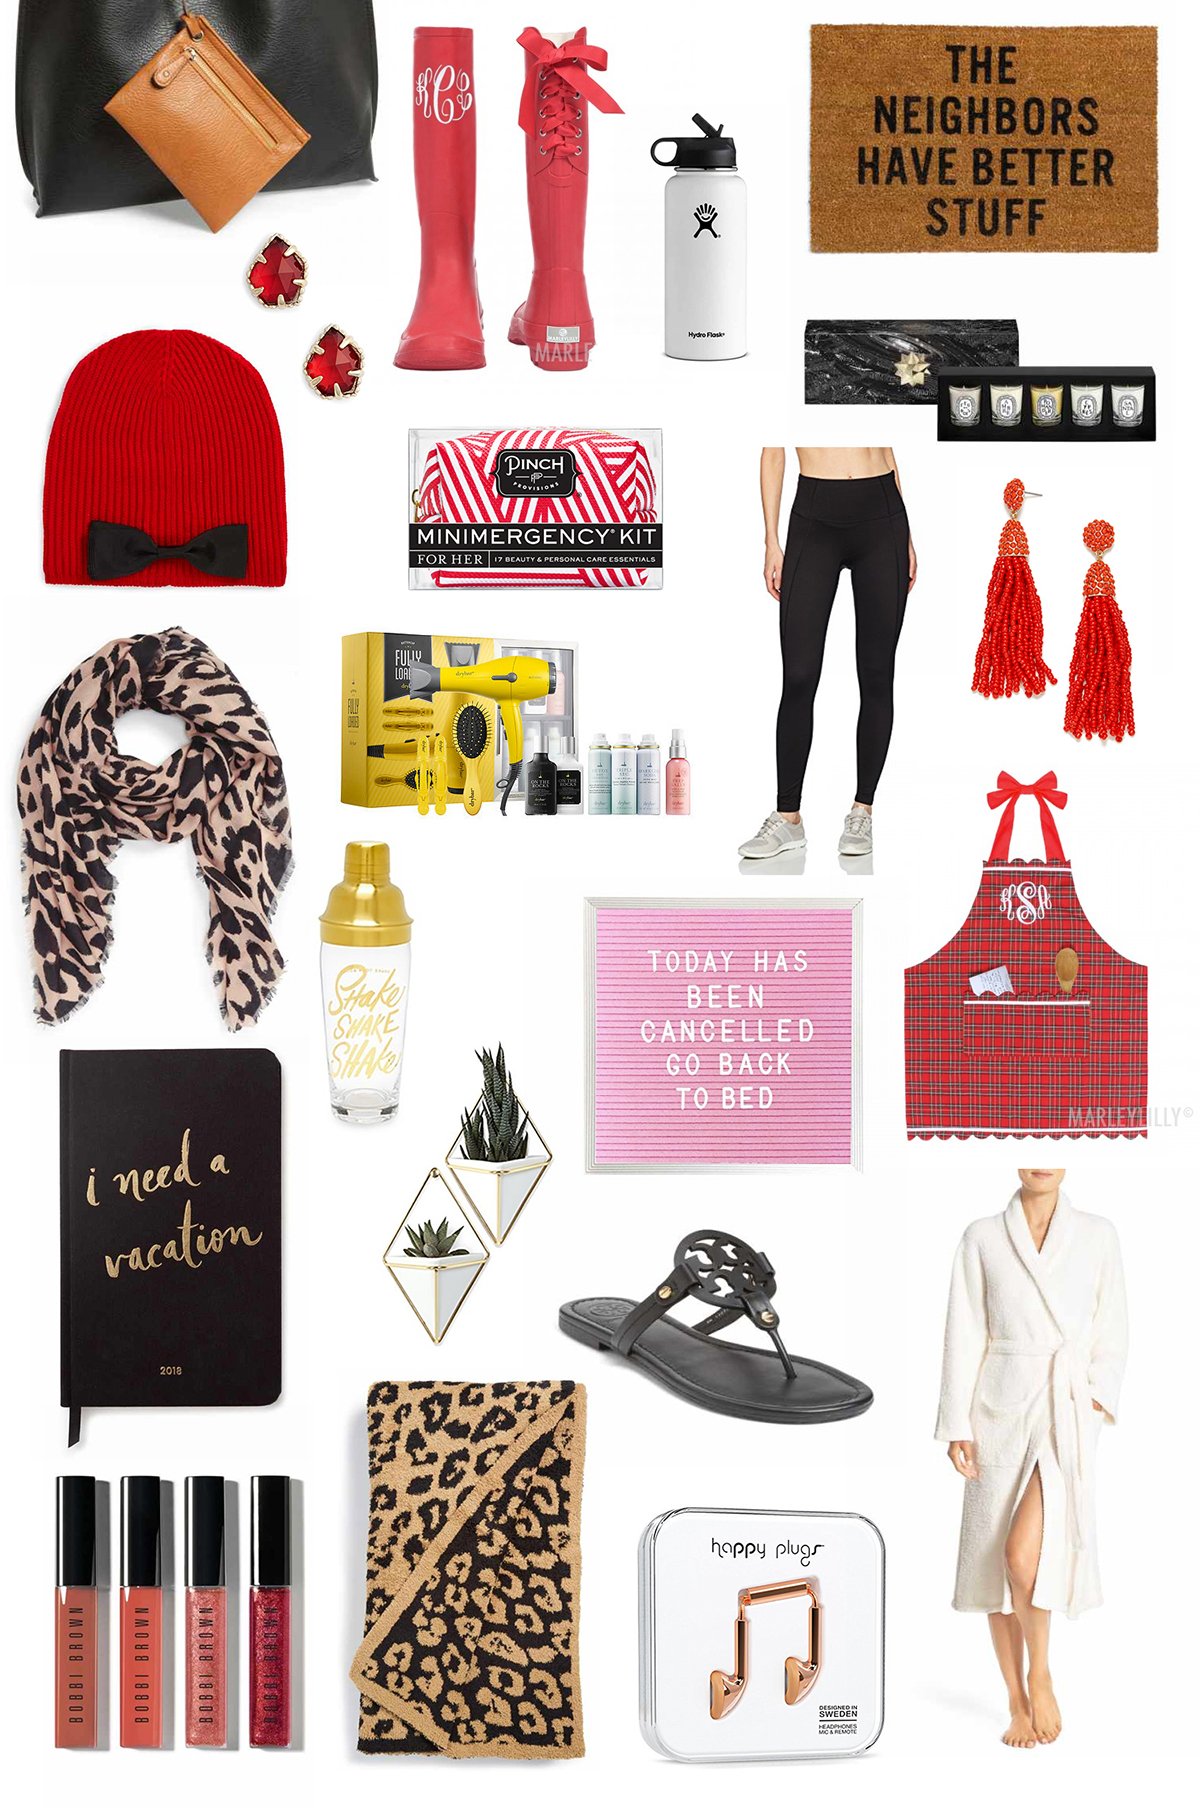 Cool Gift Ideas for Girlfriend, Mom, or BFF this Holiday Season